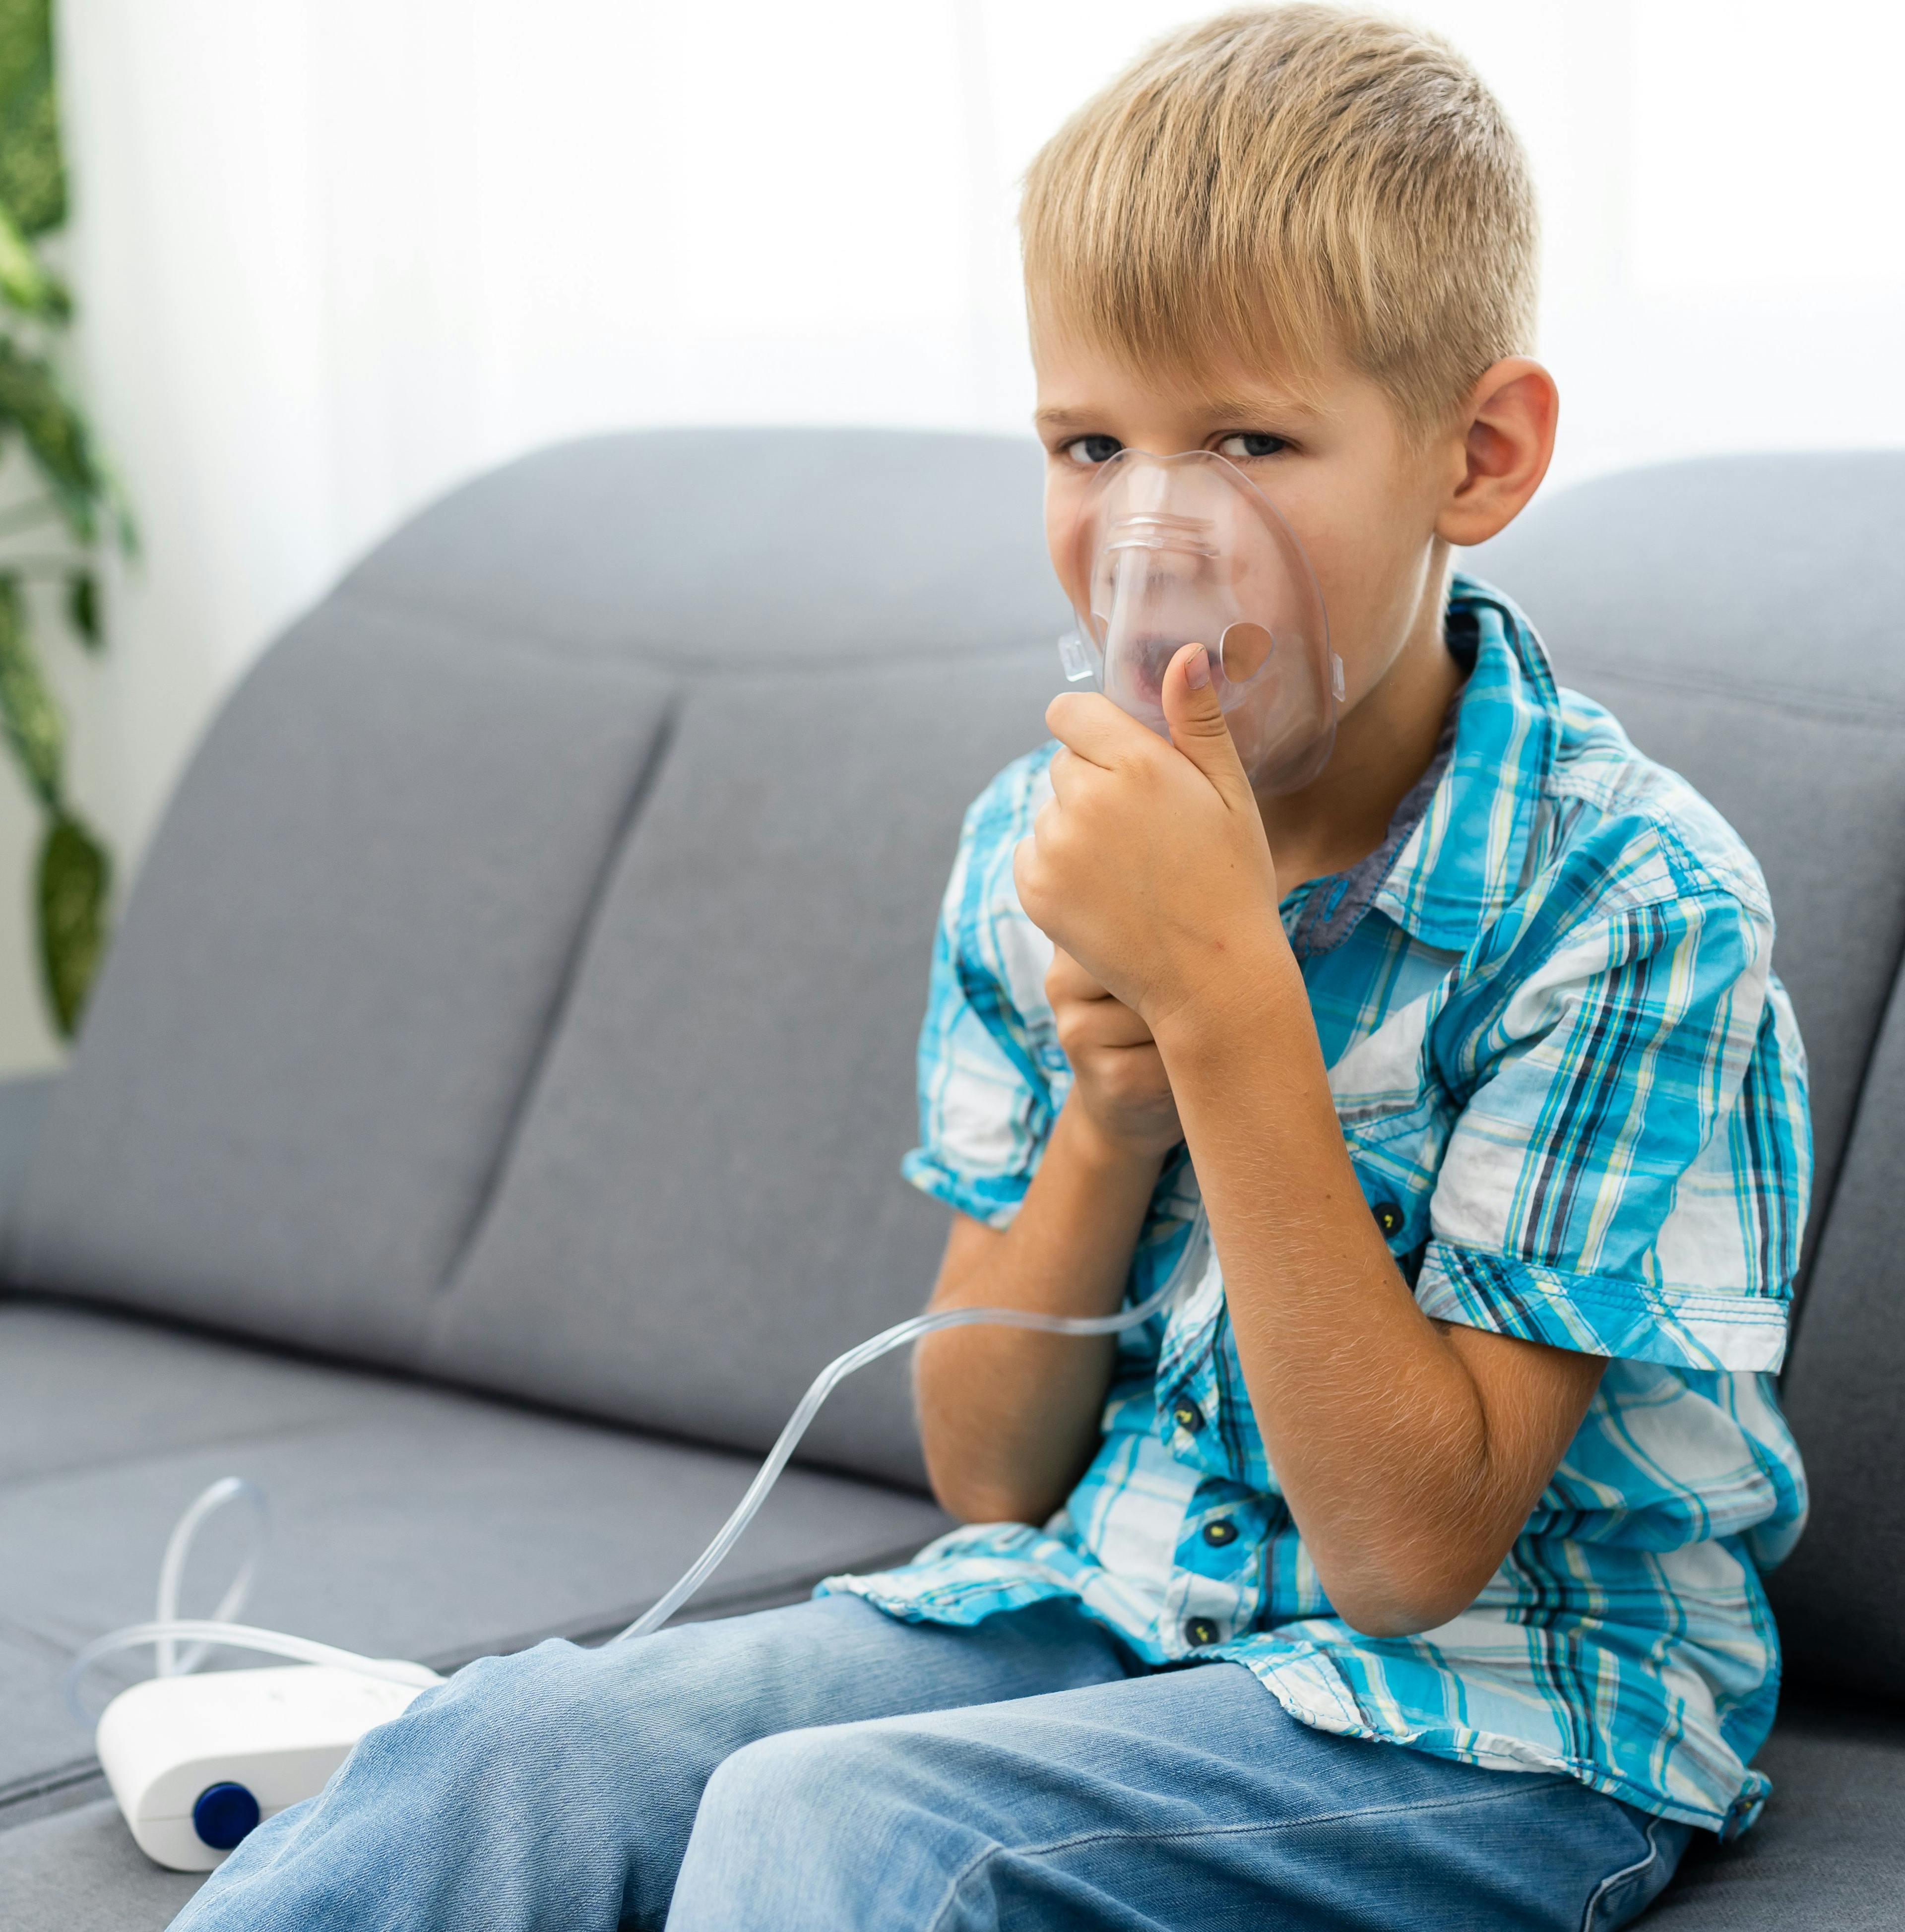 Indirect Airway Hyperresponsiveness Test Shows Promise in Optimizing Asthma Treatment for Children